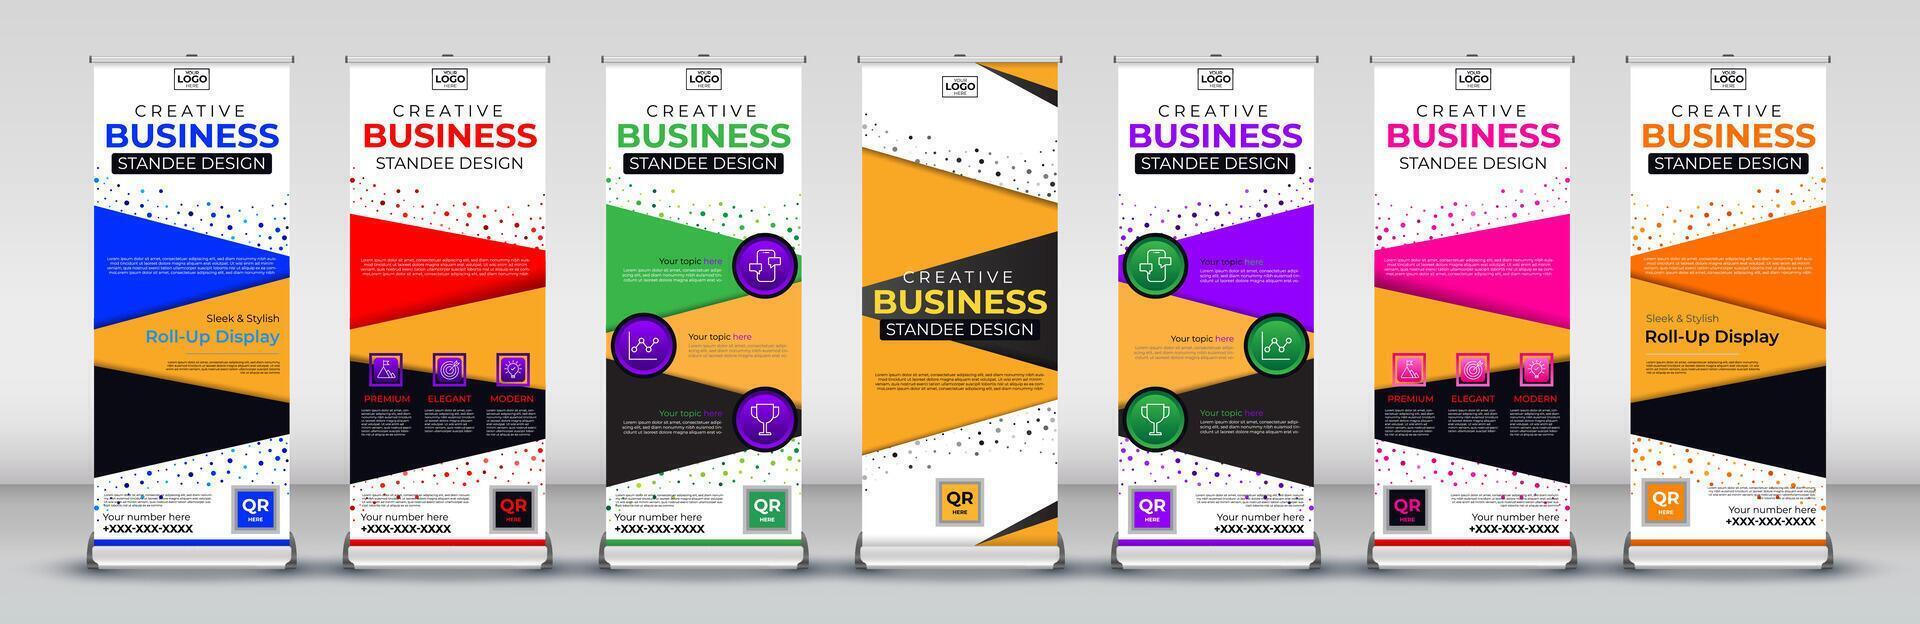 business roll up banner template with vertical abstract background for modern print ready x banner on rectangle size in blue, red, green, yellow, purple, pink and orange colors vector